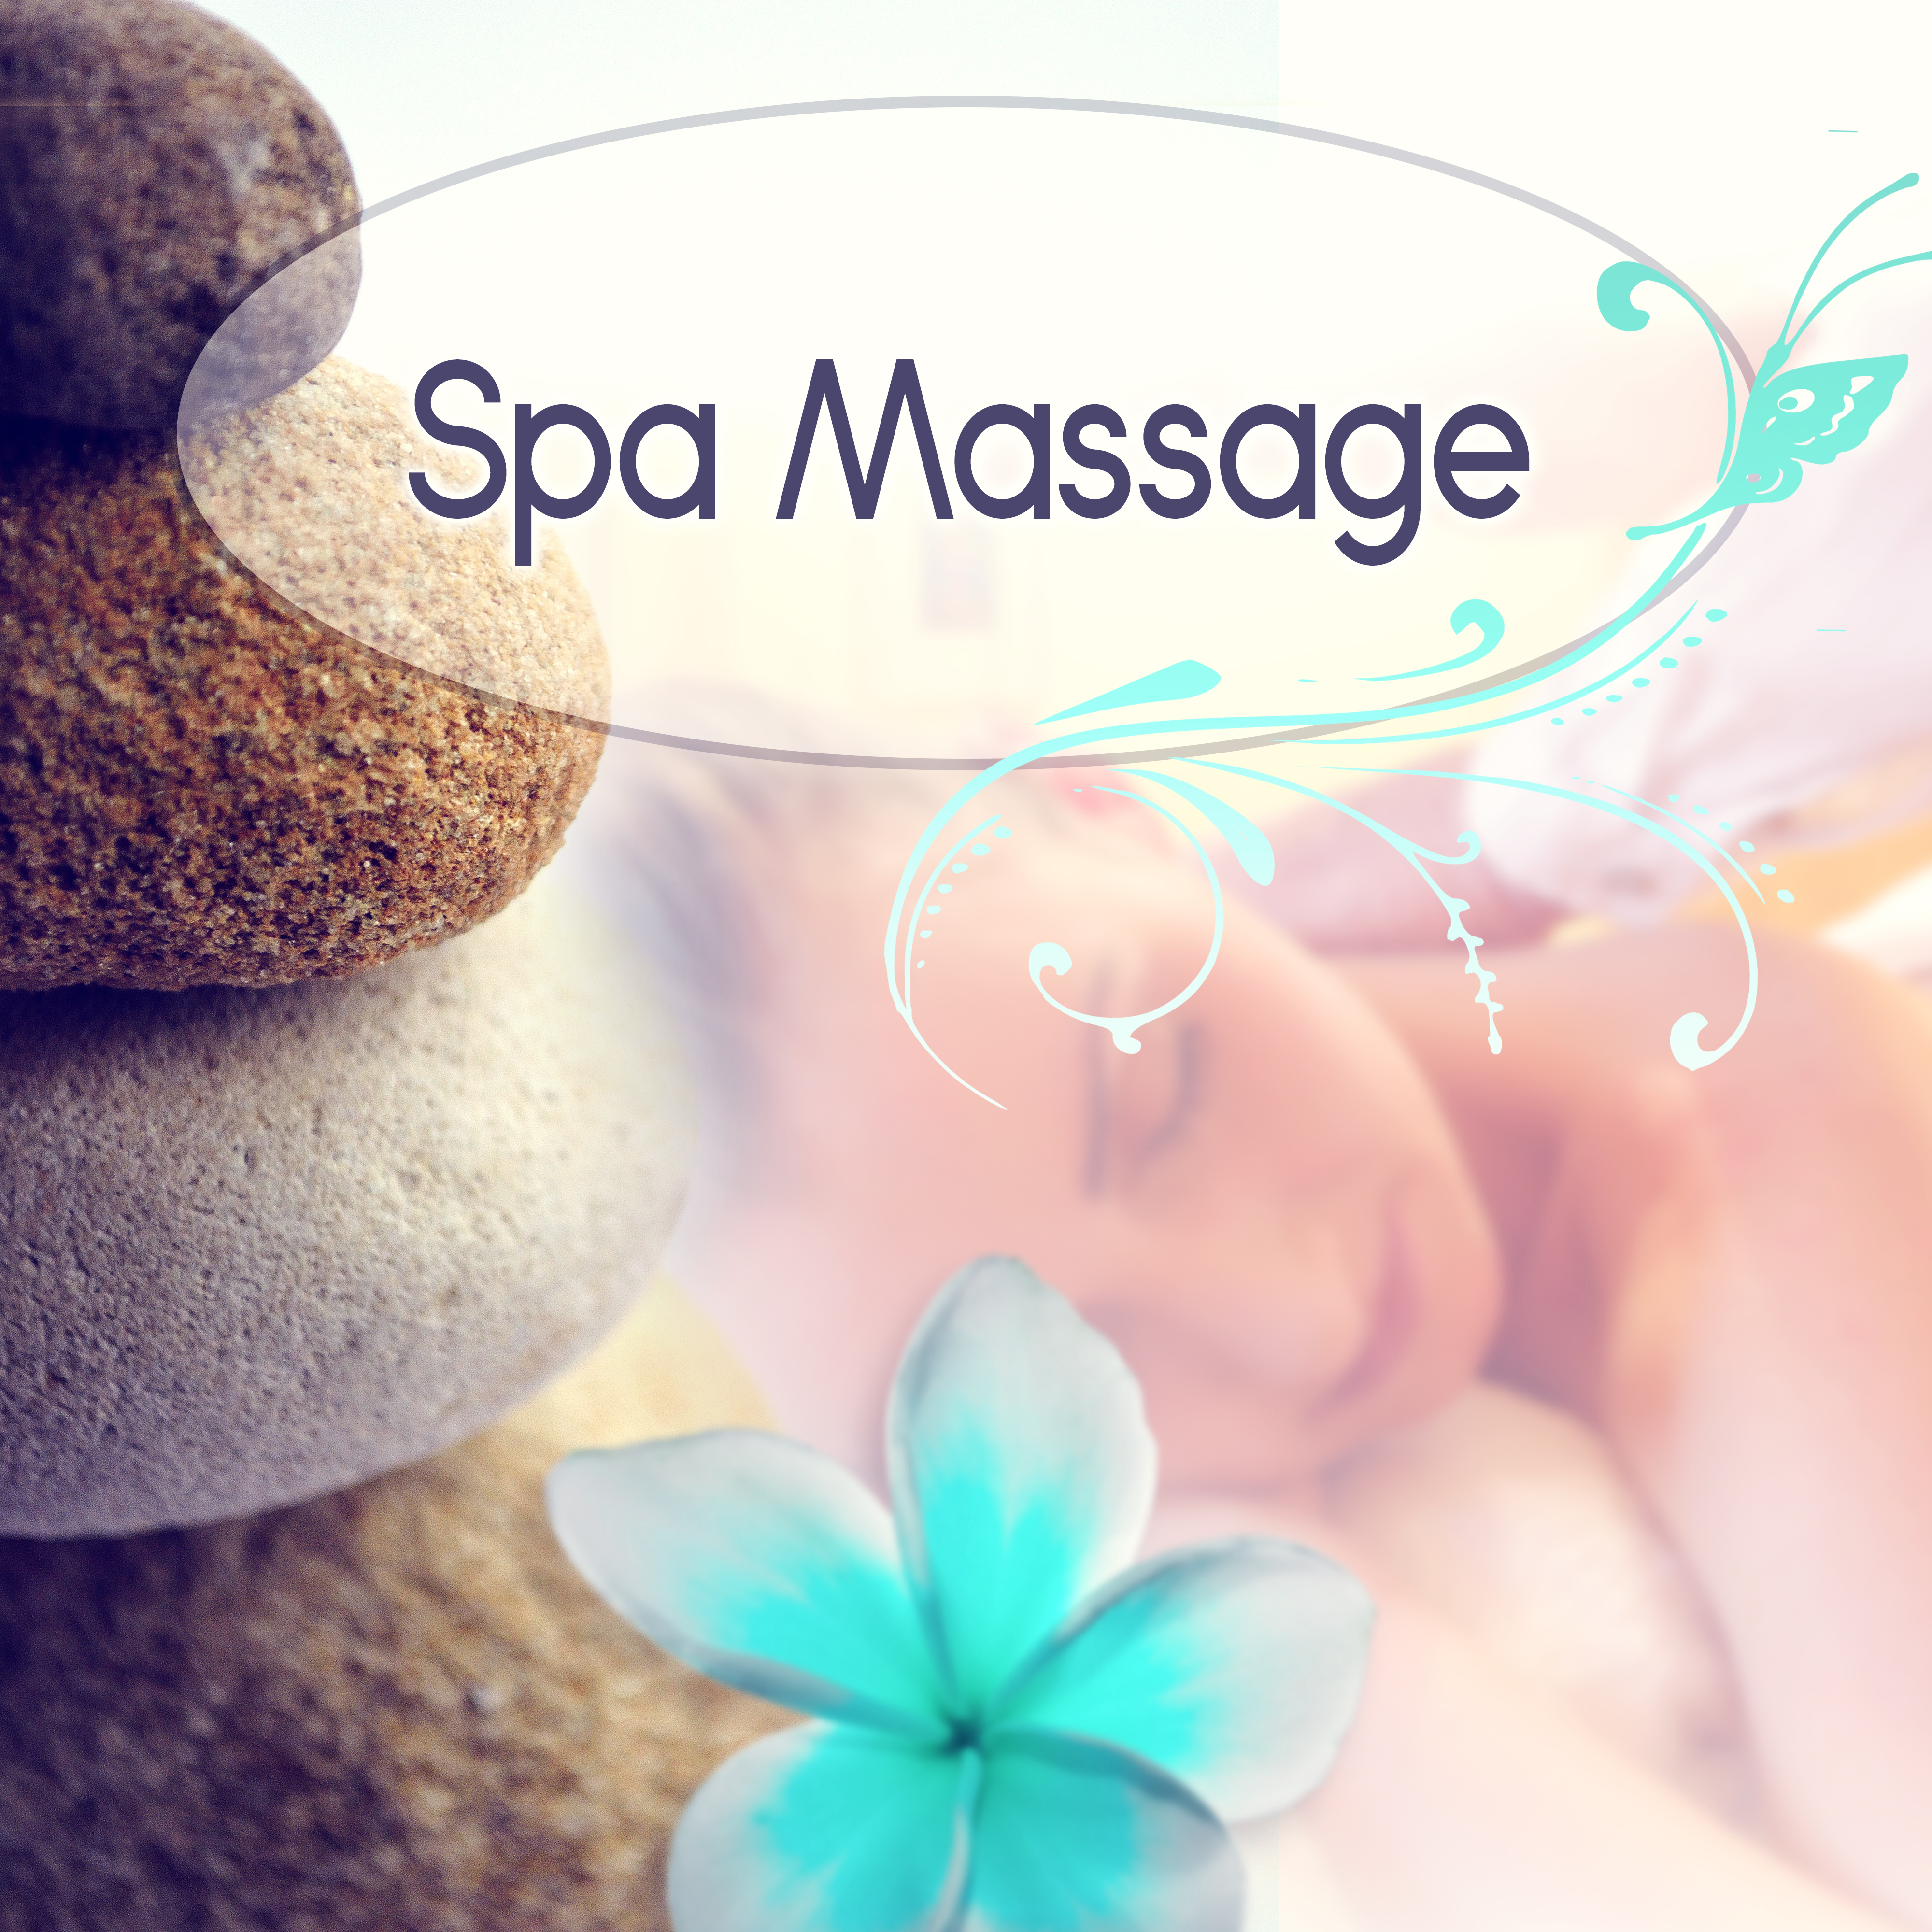 Spa Massage – Good Mood, Relaxing Nature Sounds, New Age, Deep Relaxation